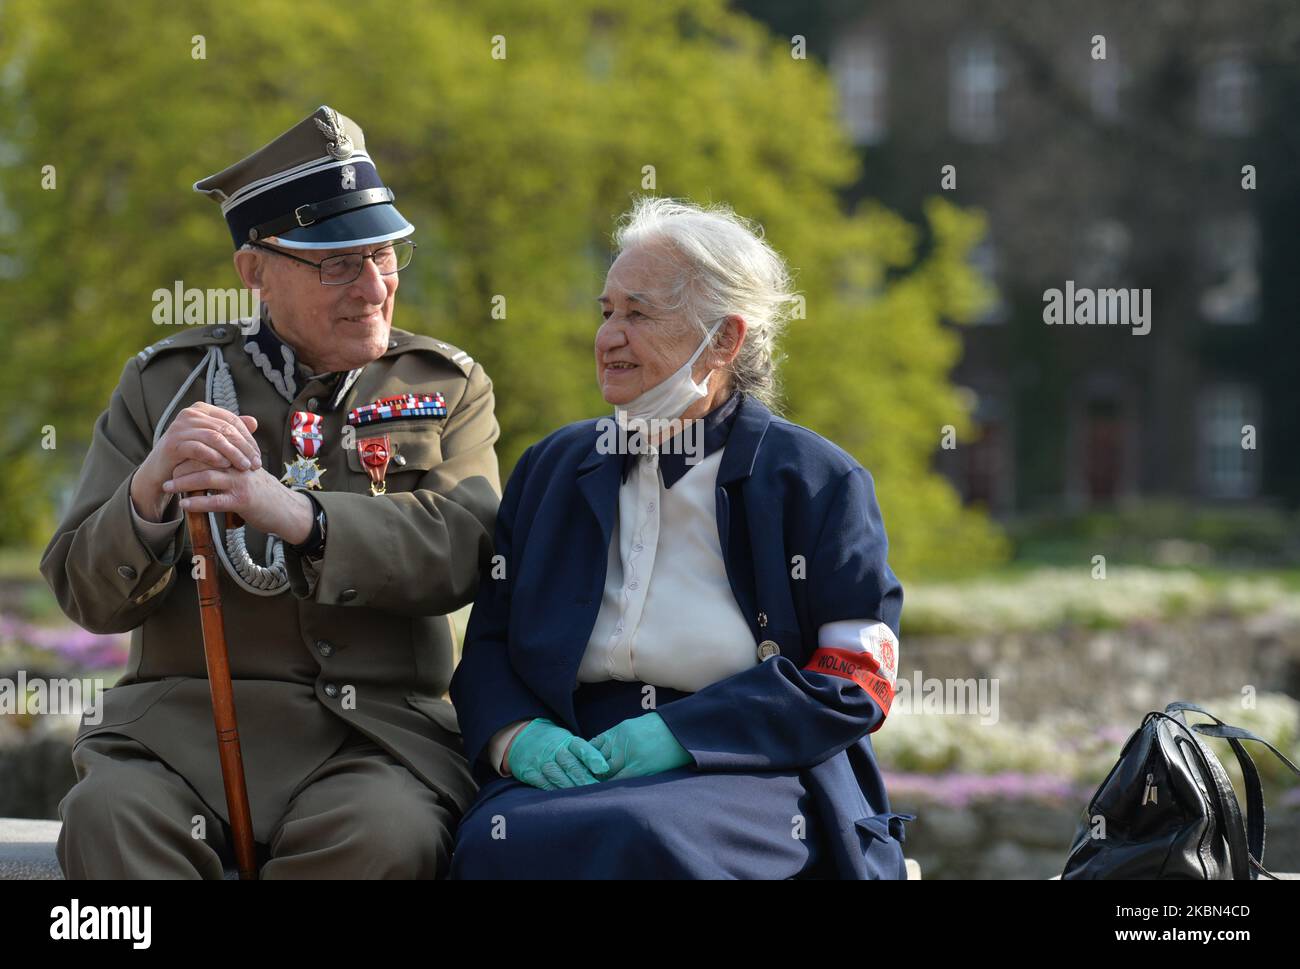 Jadwiga Ostafin-Martyna, daughter of Capt. Jozef Ostafin sentenced to death in one of the most famous trials of post-war Poland, meets with Major Stanislaw Szuro (age 99), Sachsenhausen Nazi concentration camp survivor, at Wawel Cathedral ahead of a mass-ceremony marking the 75th anniversary of the liberation of the former Nazi concentration camps in Sachsenhausen, Dachau and Ravensbruck. Sachsenhausen-Oranienburg was liberated on April 22, 1945, Dachau on April 29, 1945 and Ravensbruck on April 29–30, 1945. The initiative to celebrate this mass came from the associations of the last prisoners Stock Photo